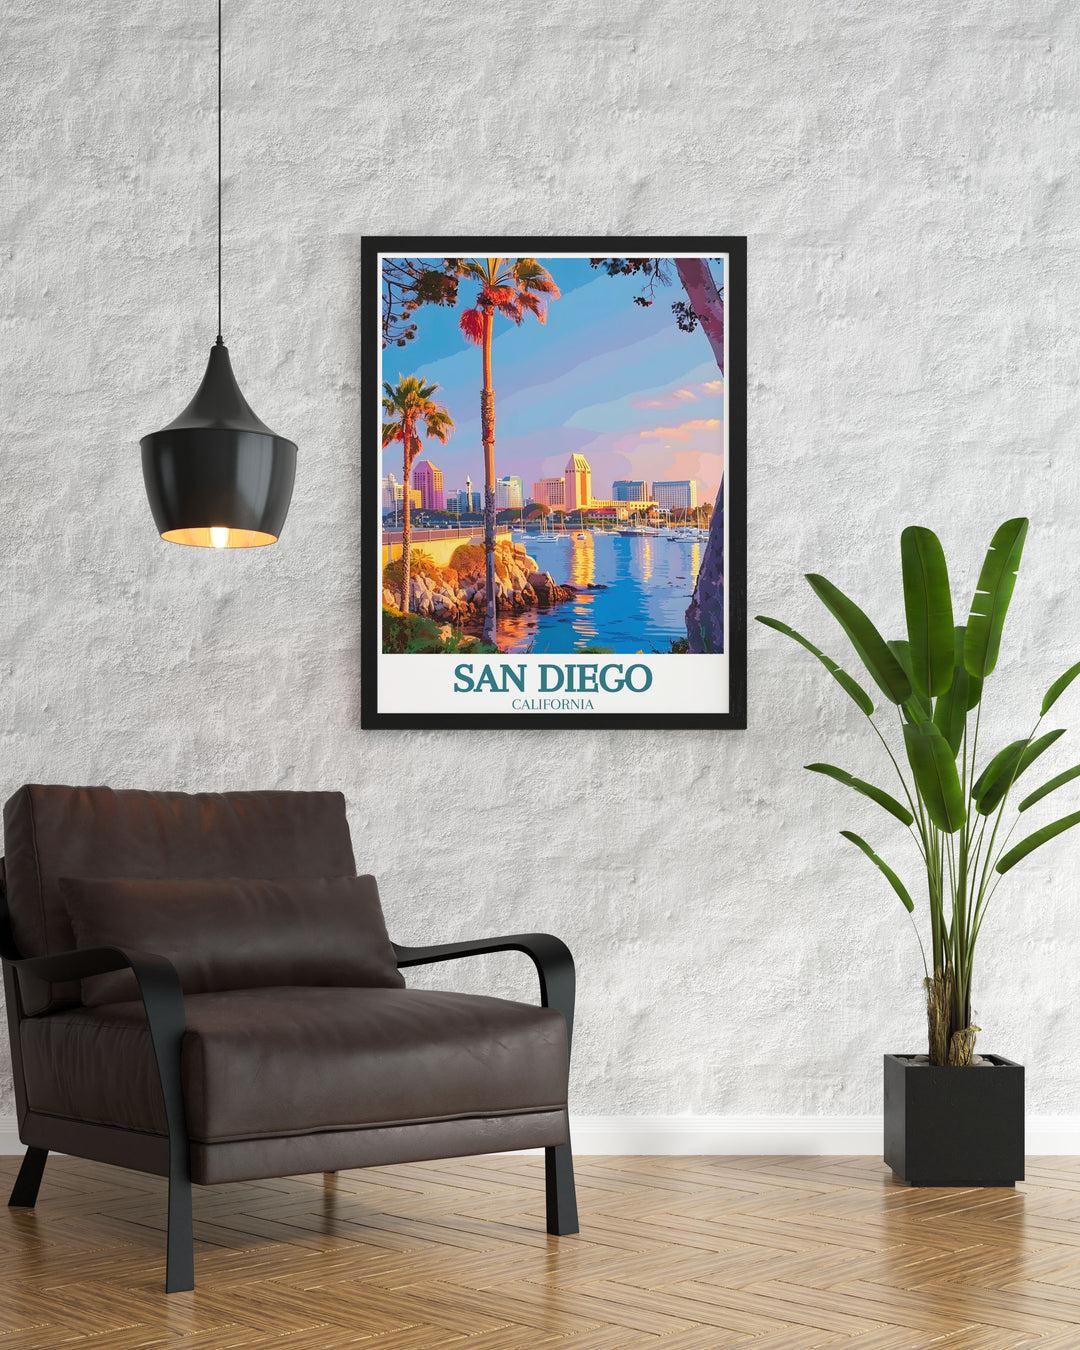 San Diego beach artwork that transforms your living space into a coastal paradise. This print captures the stunning details and vibrant atmosphere of the beach, making it a perfect addition to any home decor collection for California art lovers.